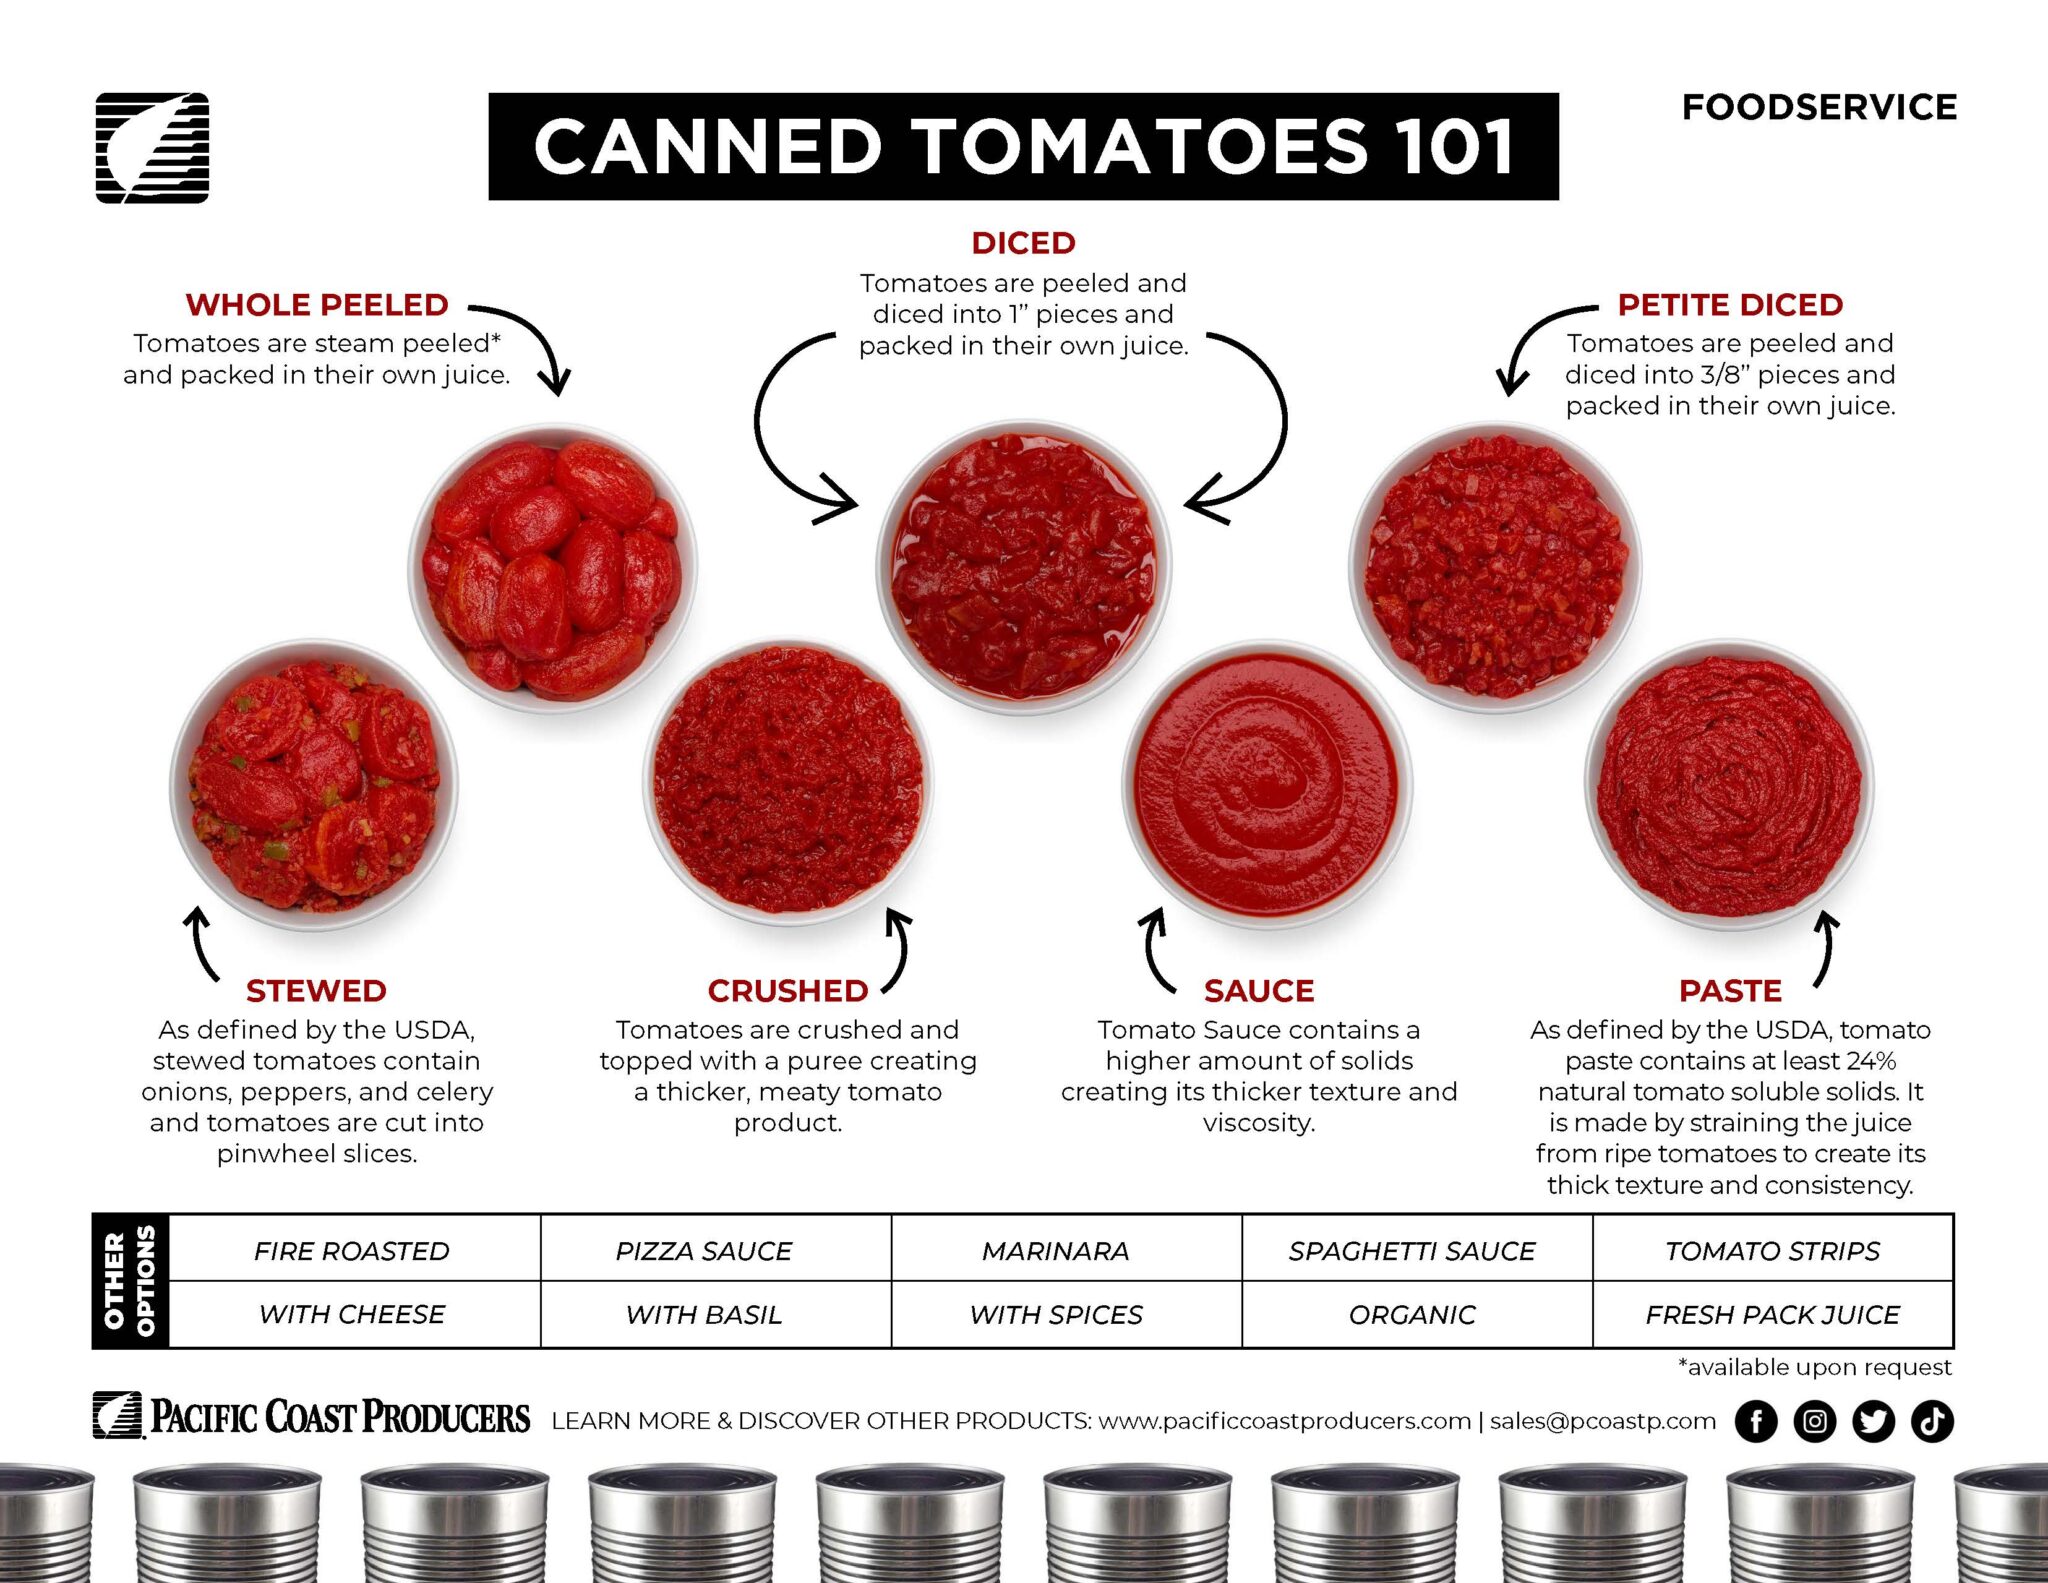 Canning tomatoes 101 infographic.